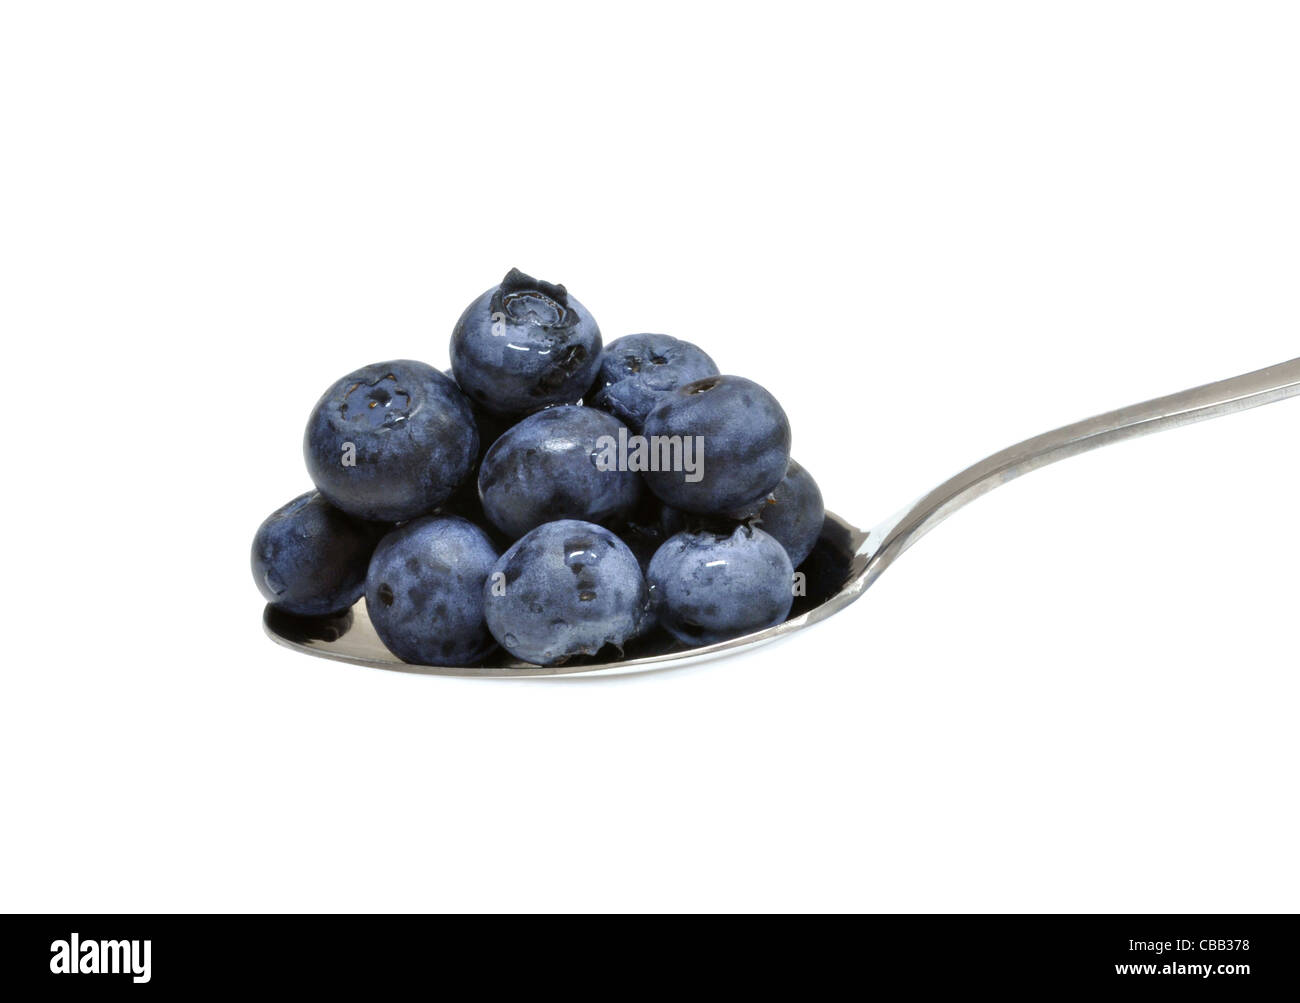 Spoonful of blueberries on a white background Stock Photo